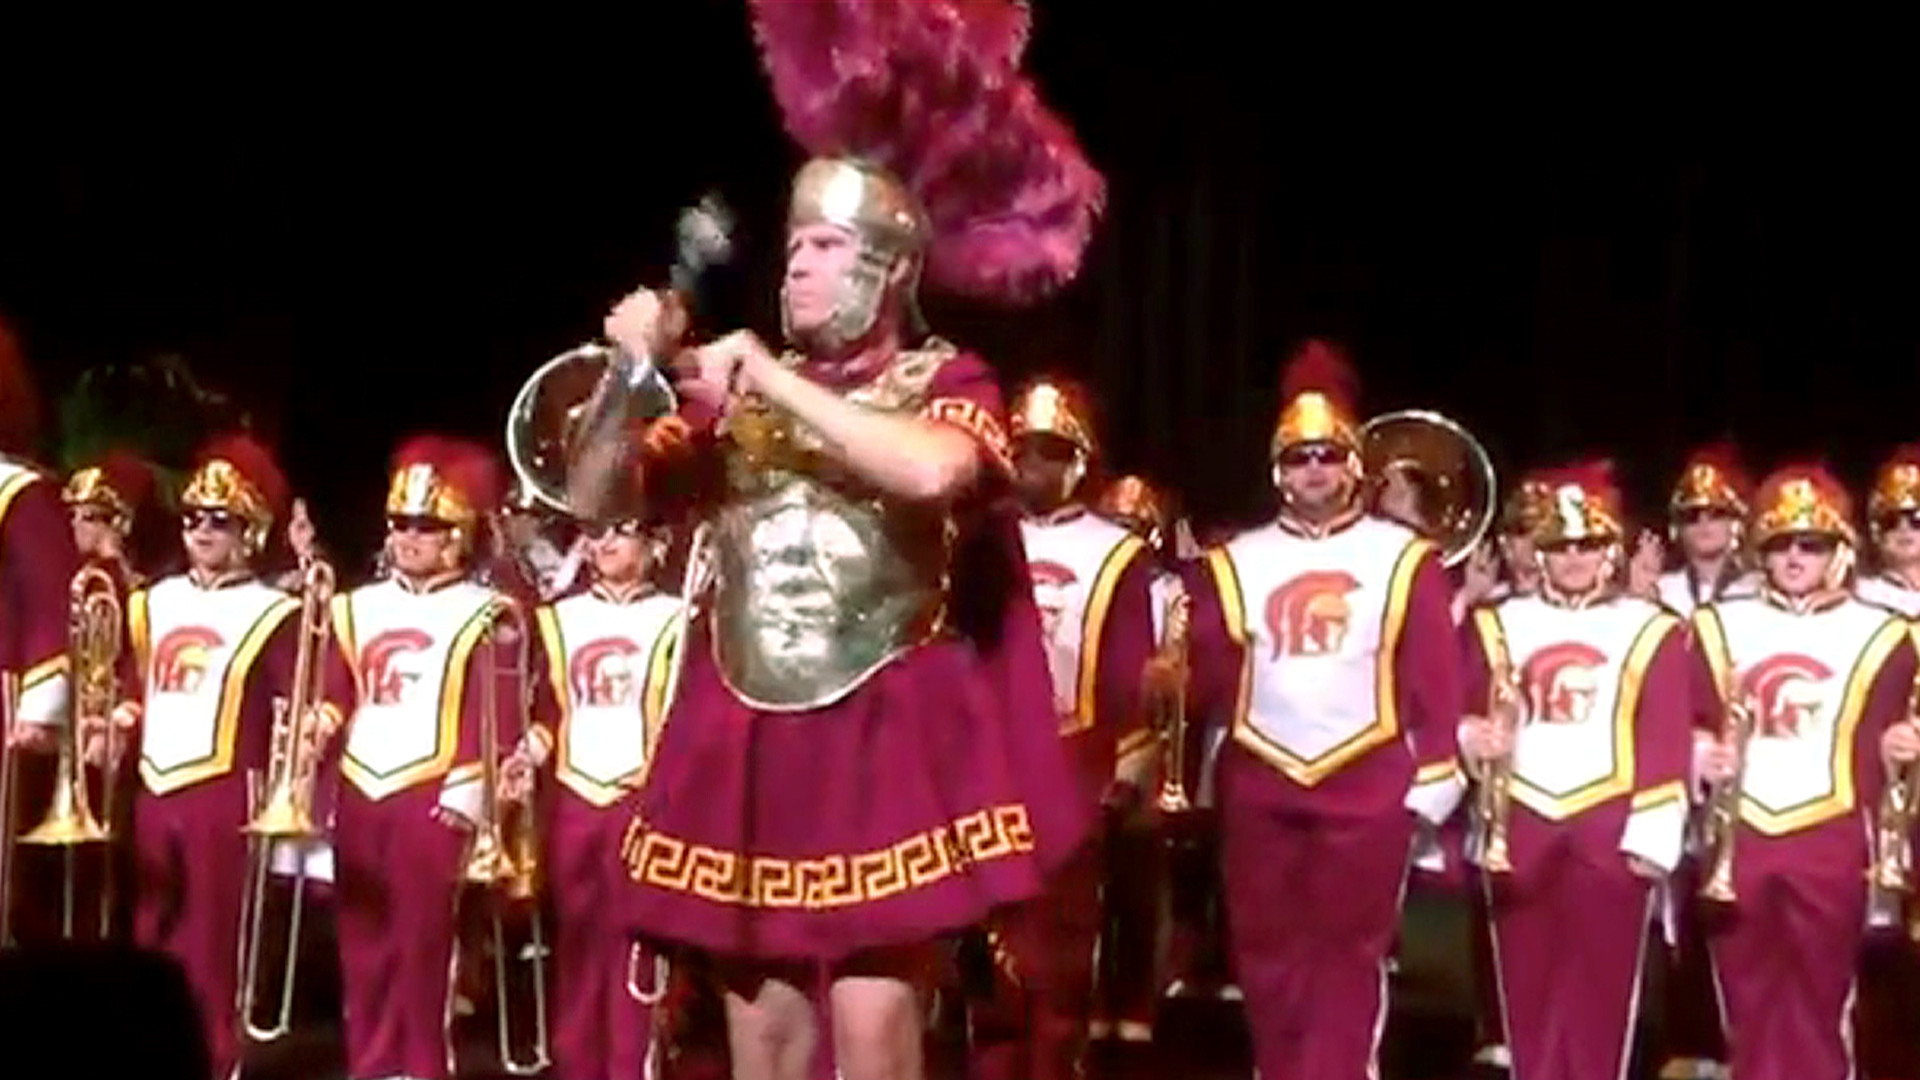 1920x1080 Will Ferrell leads USC marching band while dressed as Tommy Trojan -  TODAY.com